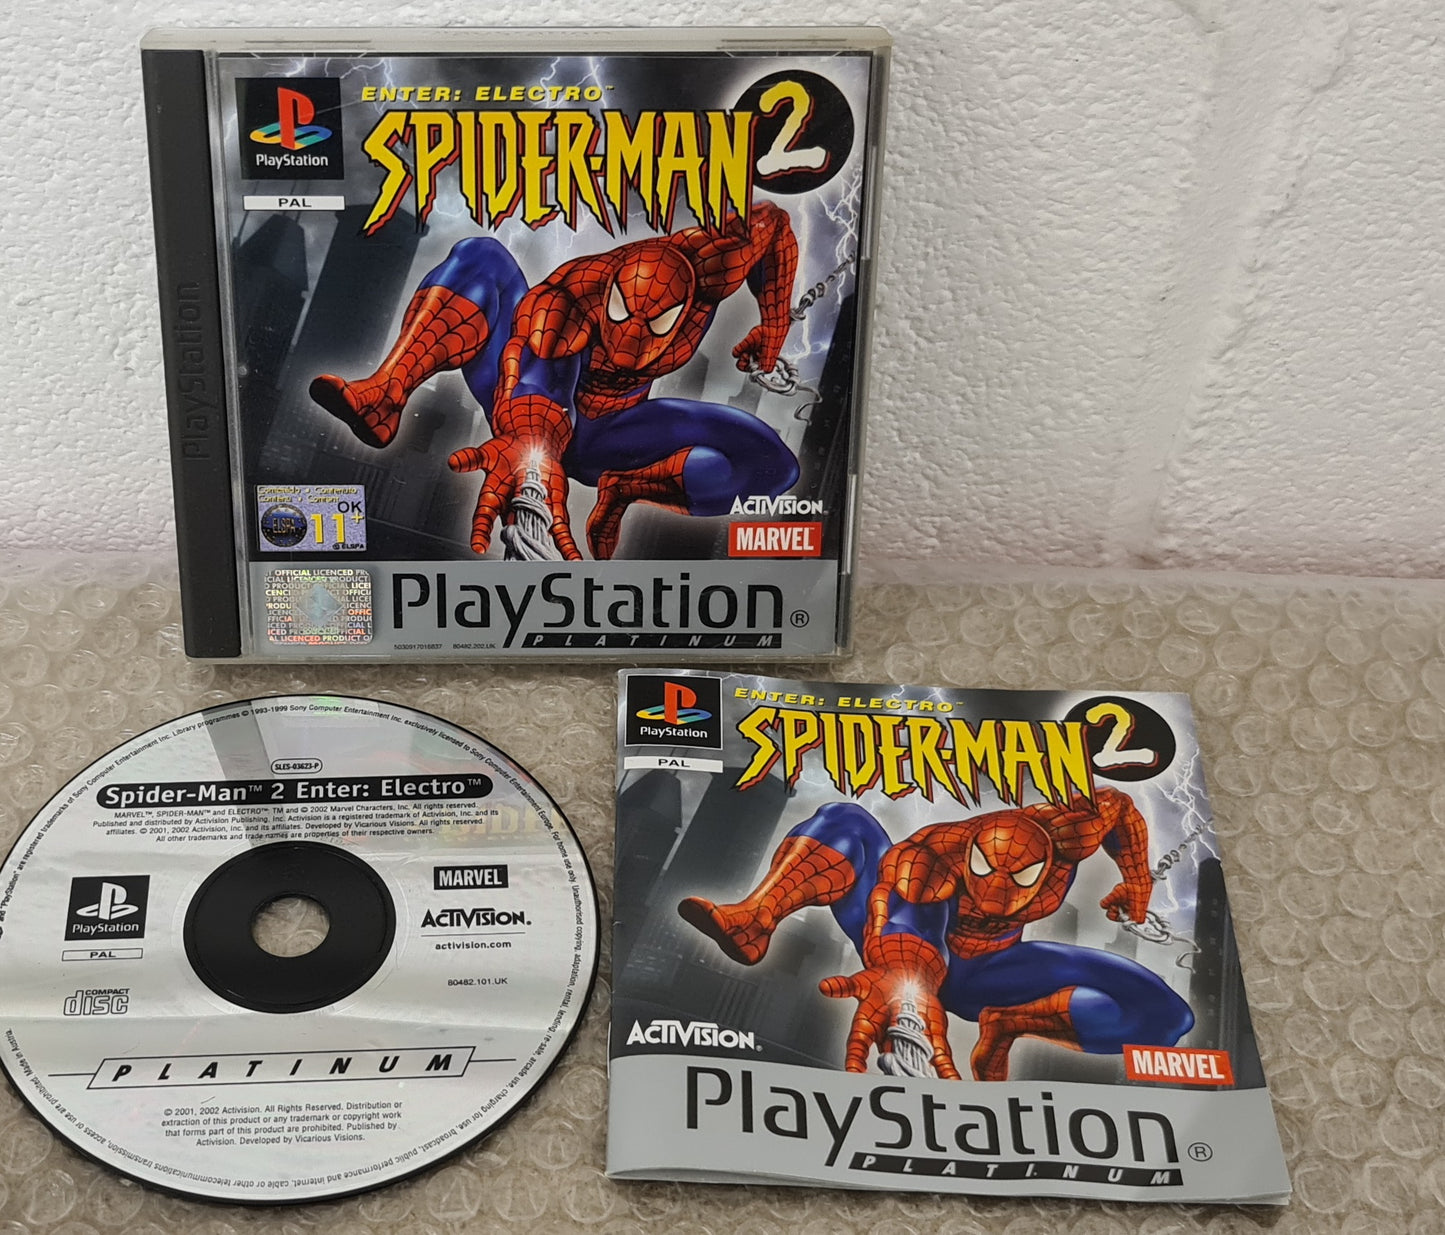 Spider-Man 2 Enter Electro Platinum Sony Playstation 1 (PS1) Game